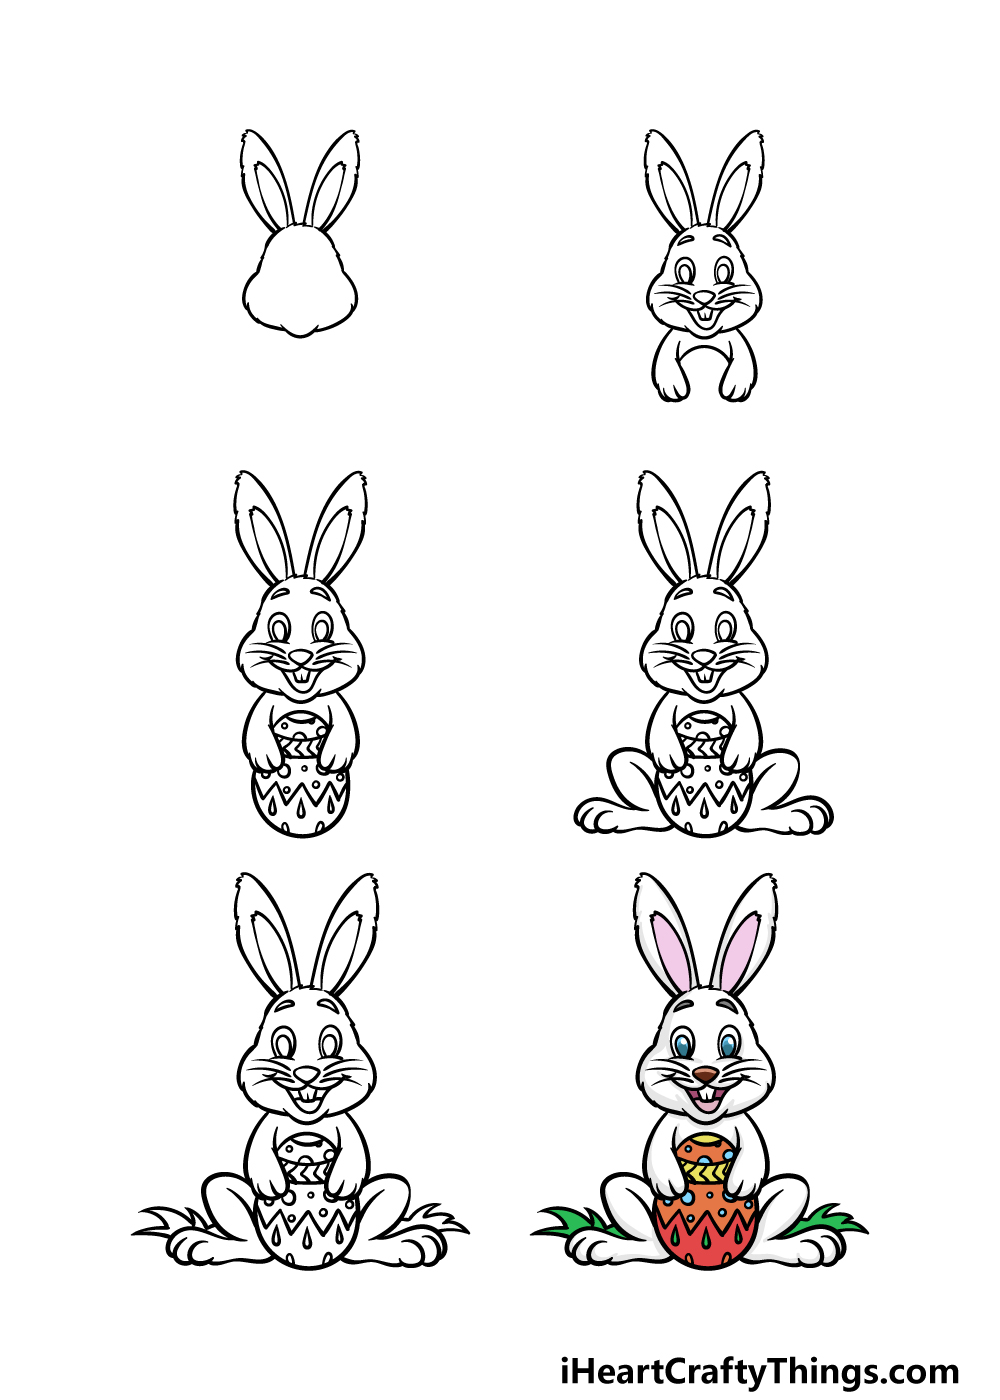 How to Draw Cute Easter Bunny | Guided Drawing Video Tutorial